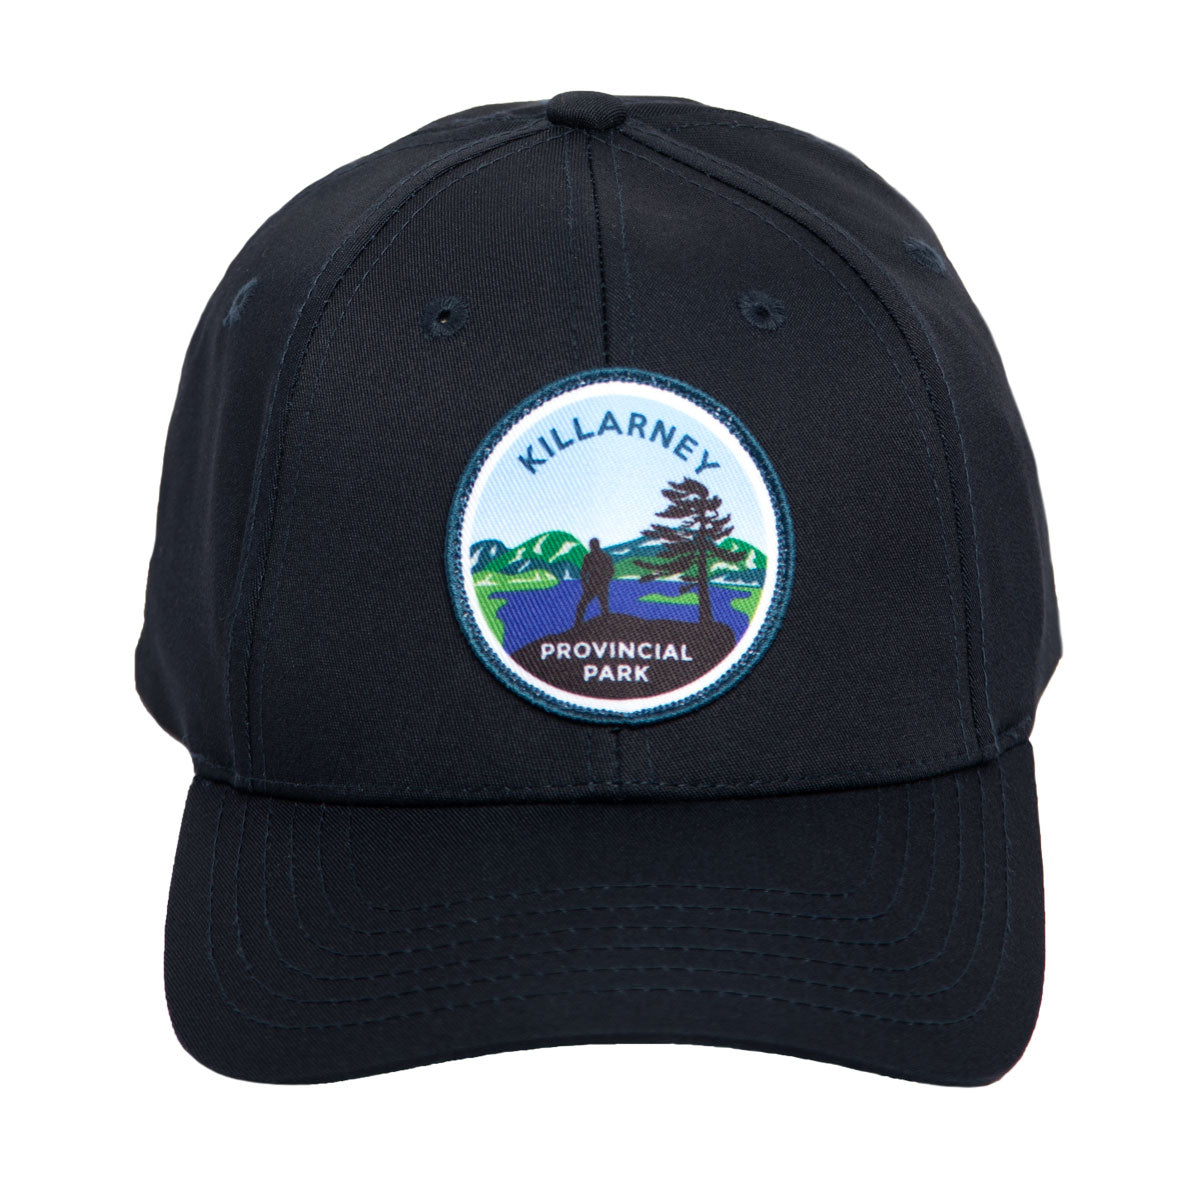 Navy park specific ball cap, featuring embroidered Killarney Provincial Park crest. Front view of brim. 